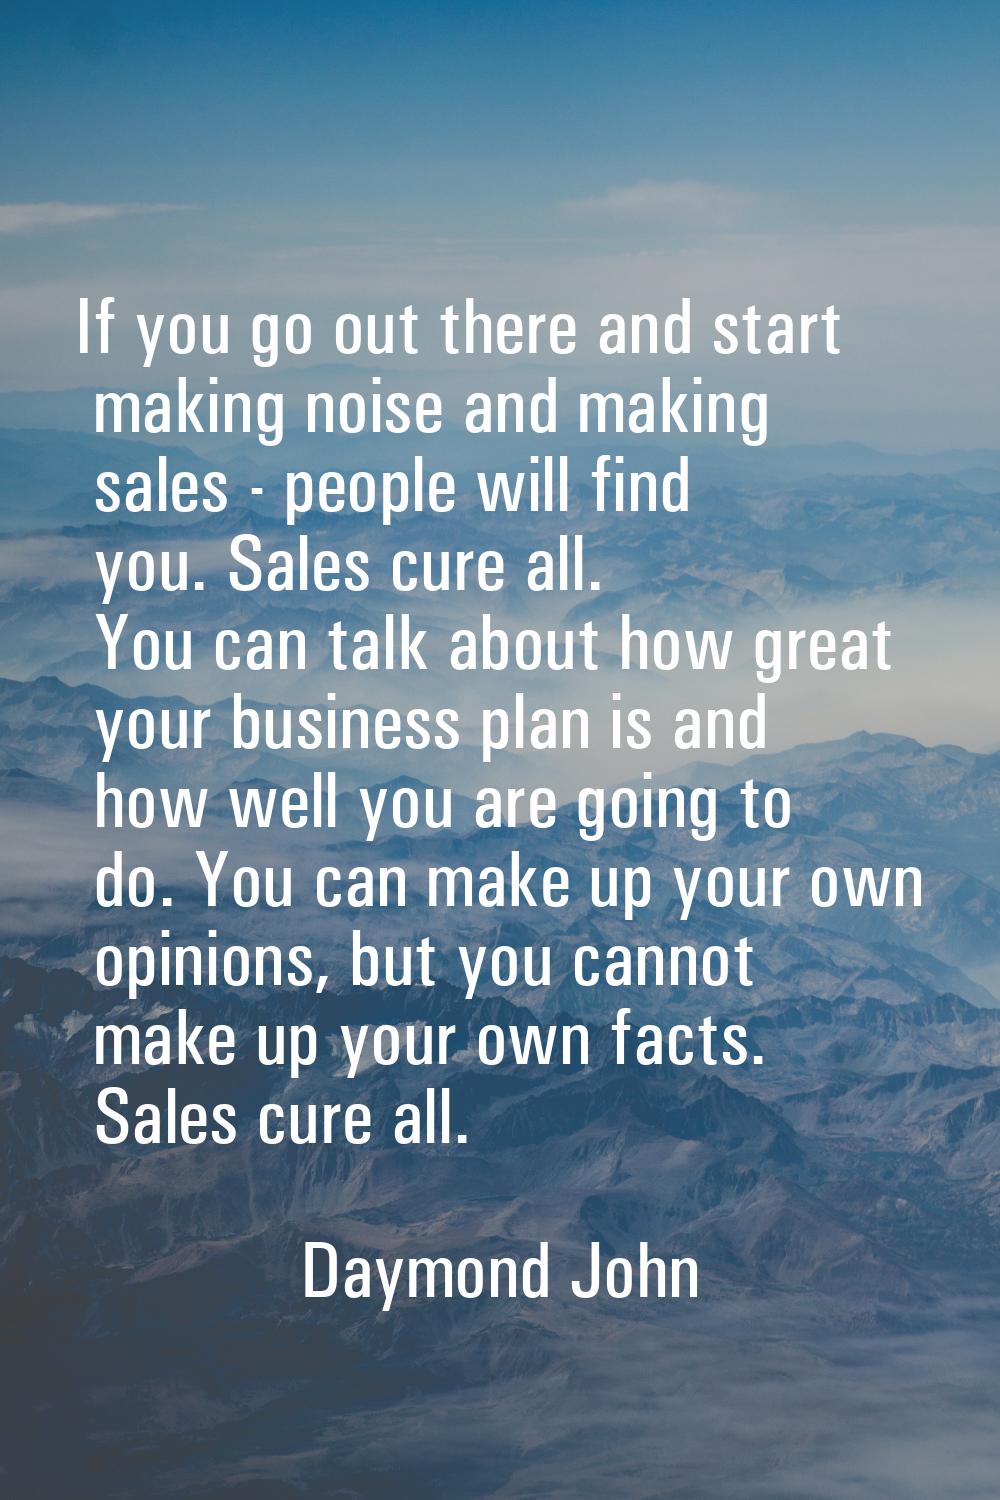 If you go out there and start making noise and making sales - people will find you. Sales cure all.